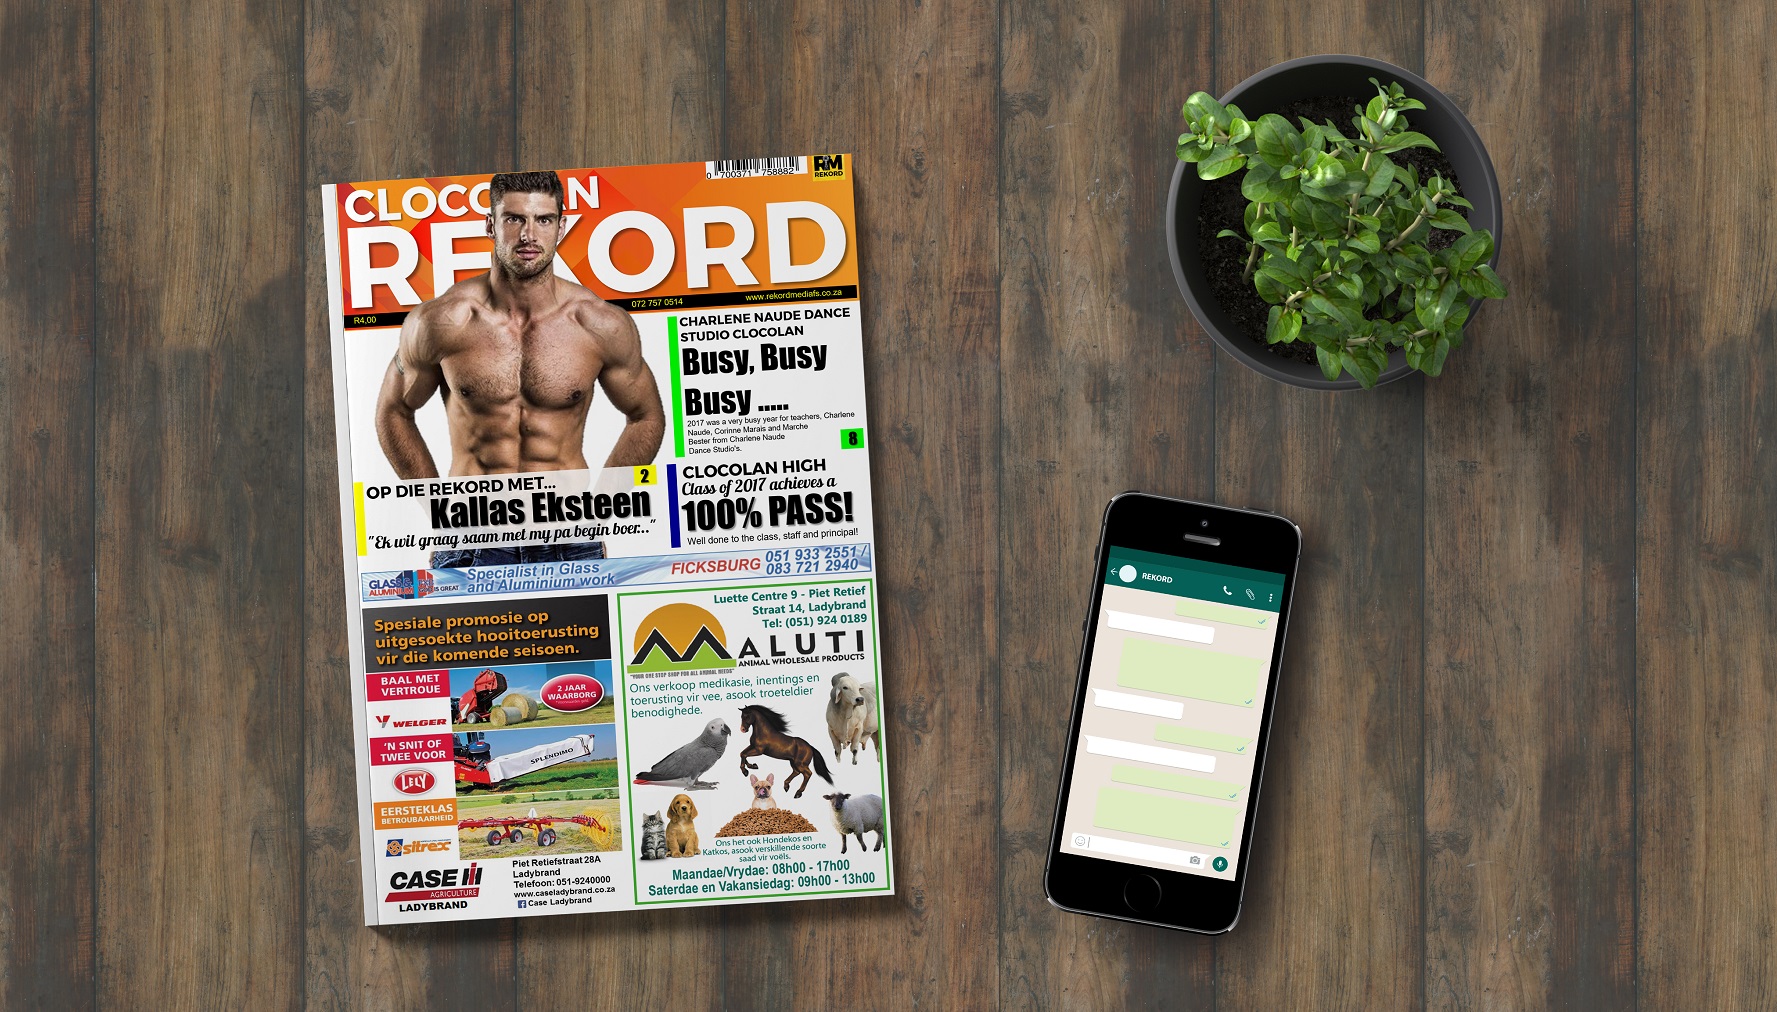 How Rekord Media uses local news and WhatsApp to reach readers